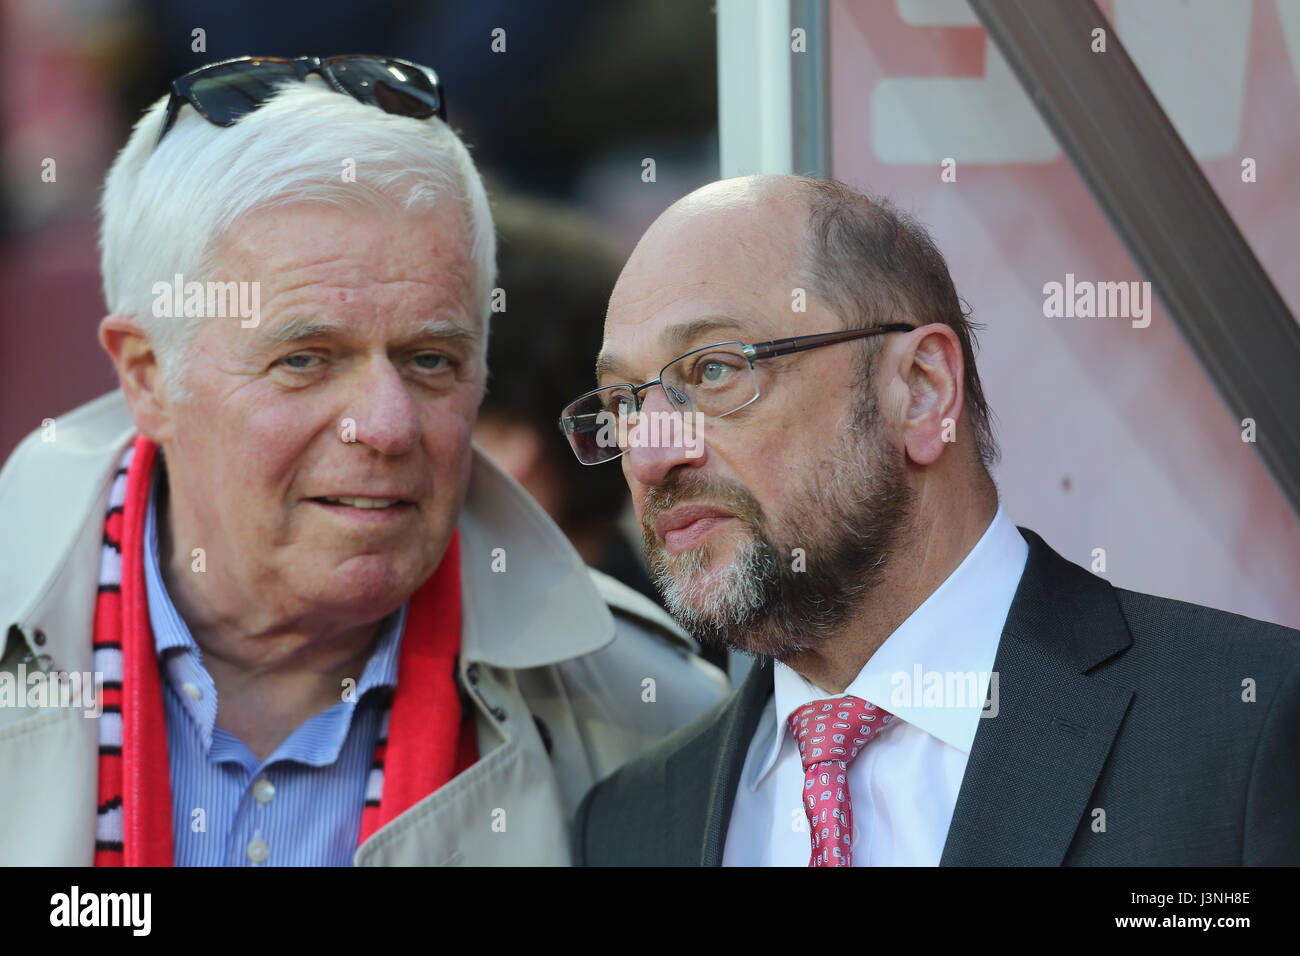 Cologne, Germany, 5th May 2017, Bundesliga matchday 32, 1. FC Koeln vs Werder Bremen: Social democratic candidate for Chancellorship Martin Schulz (R) stands beside FC Cologne club president Werner Spinner (Koeln).         Credit: Juergen Schwarz/Alamy Live News Stock Photo